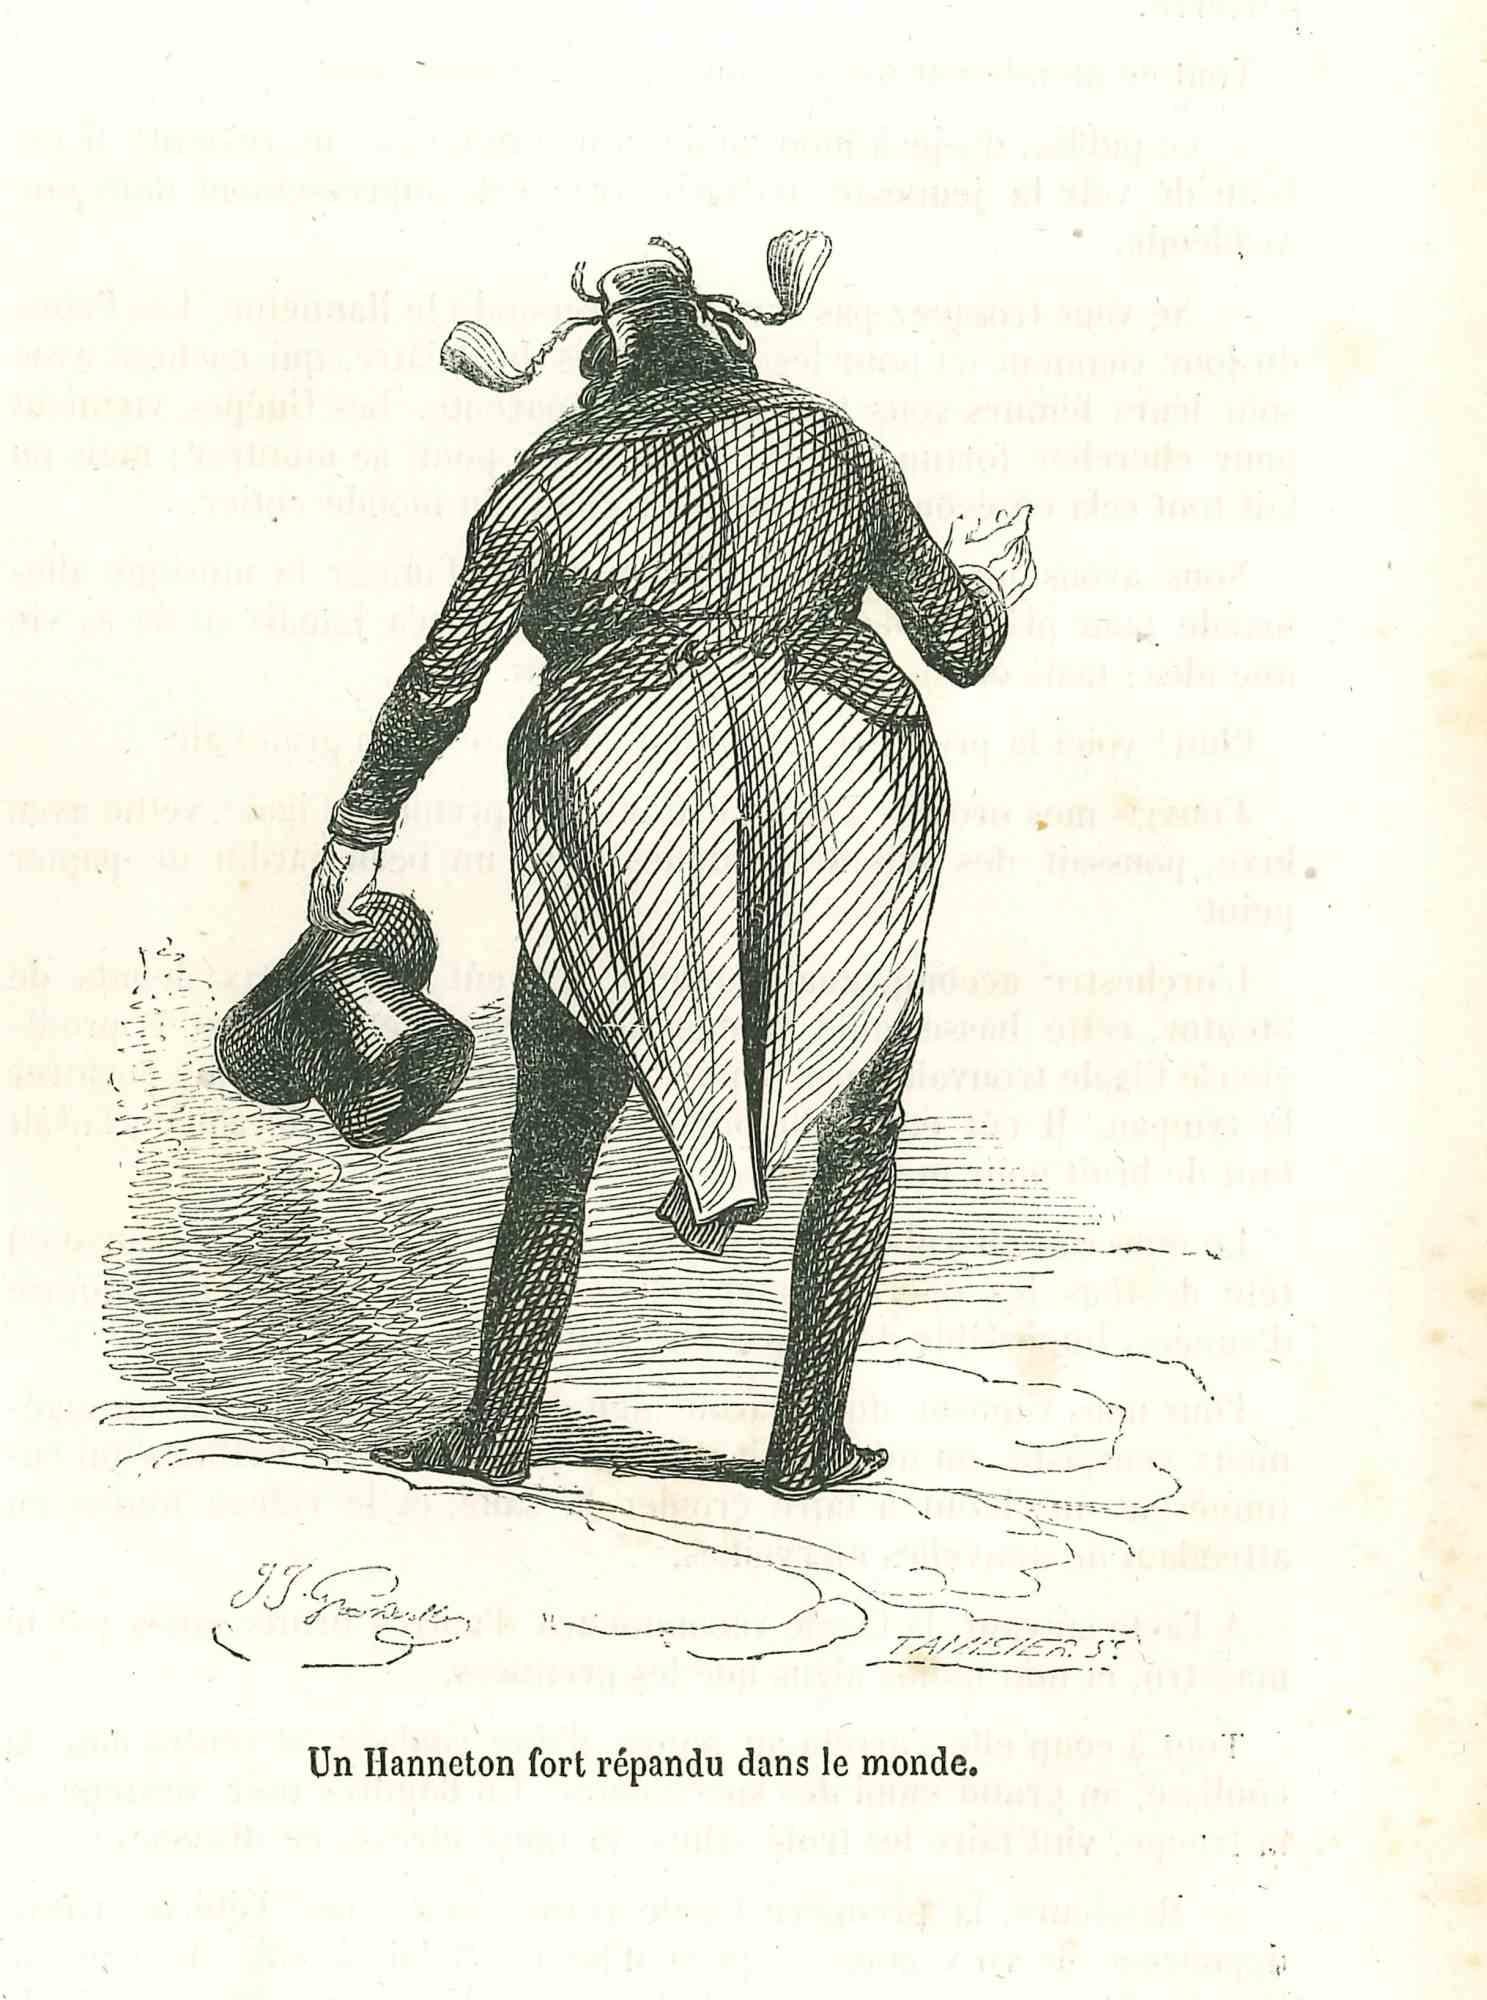 Jean Jeacques Grandville Animal Print - Mr.Beetle From His Back - Original Lithograph by J.J Grandville - 1852